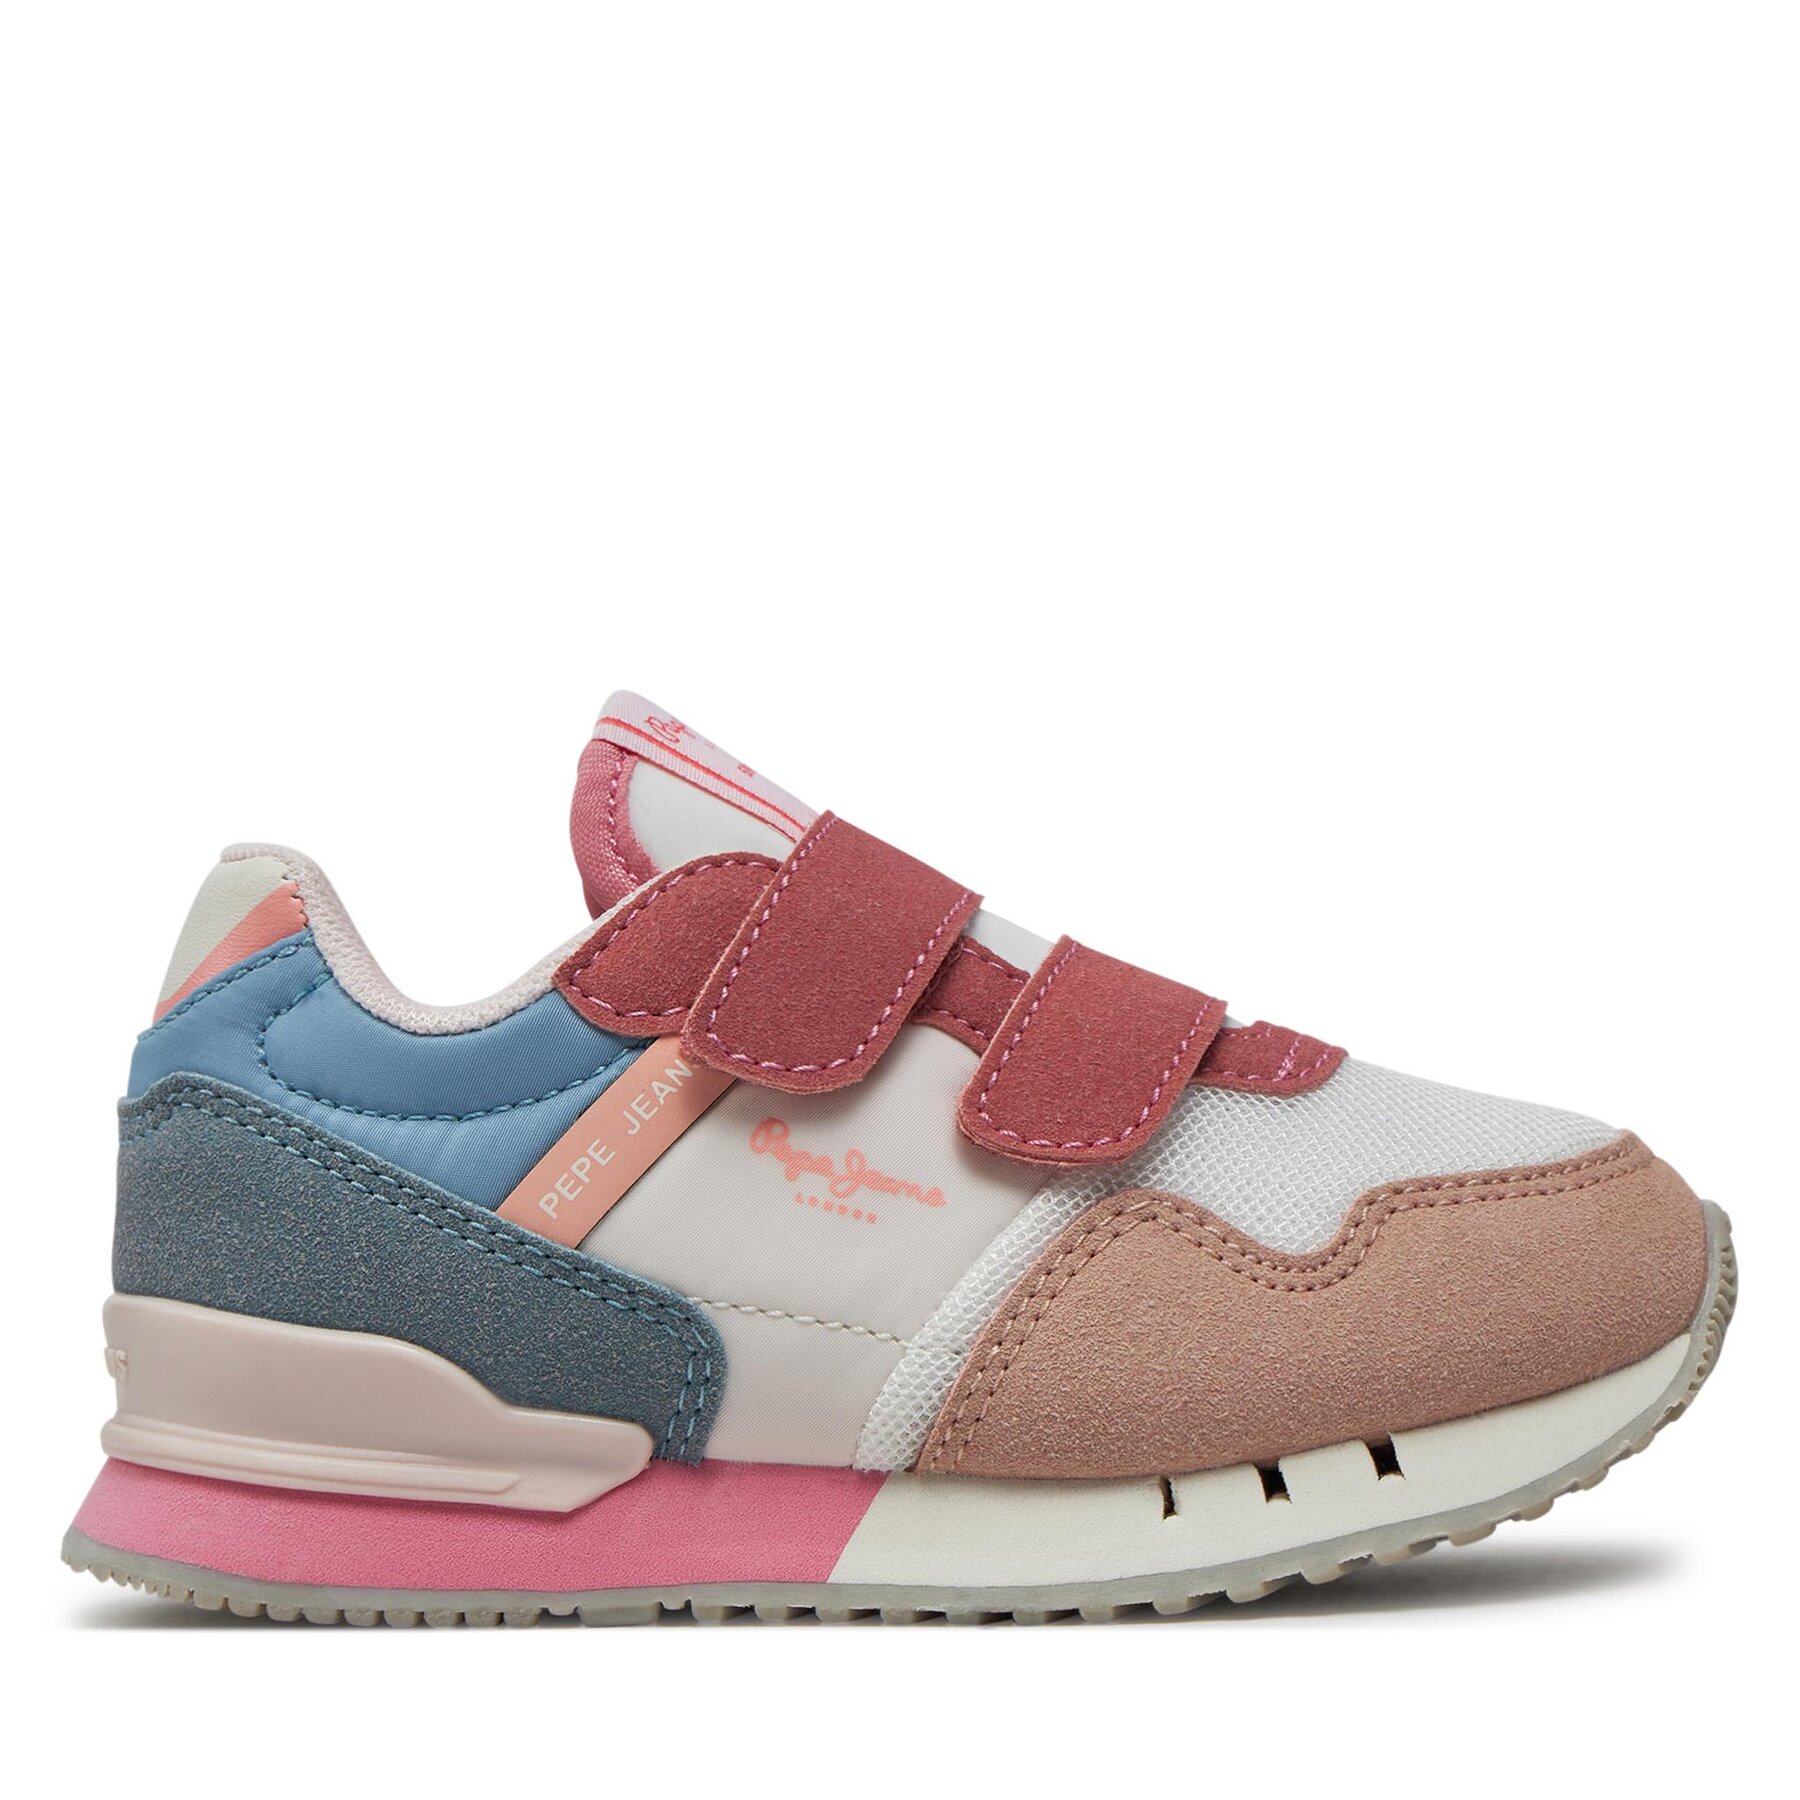 Sneakers Pepe Jeans London Urban Gk PGS30599 Soft Pink 305 von Pepe Jeans